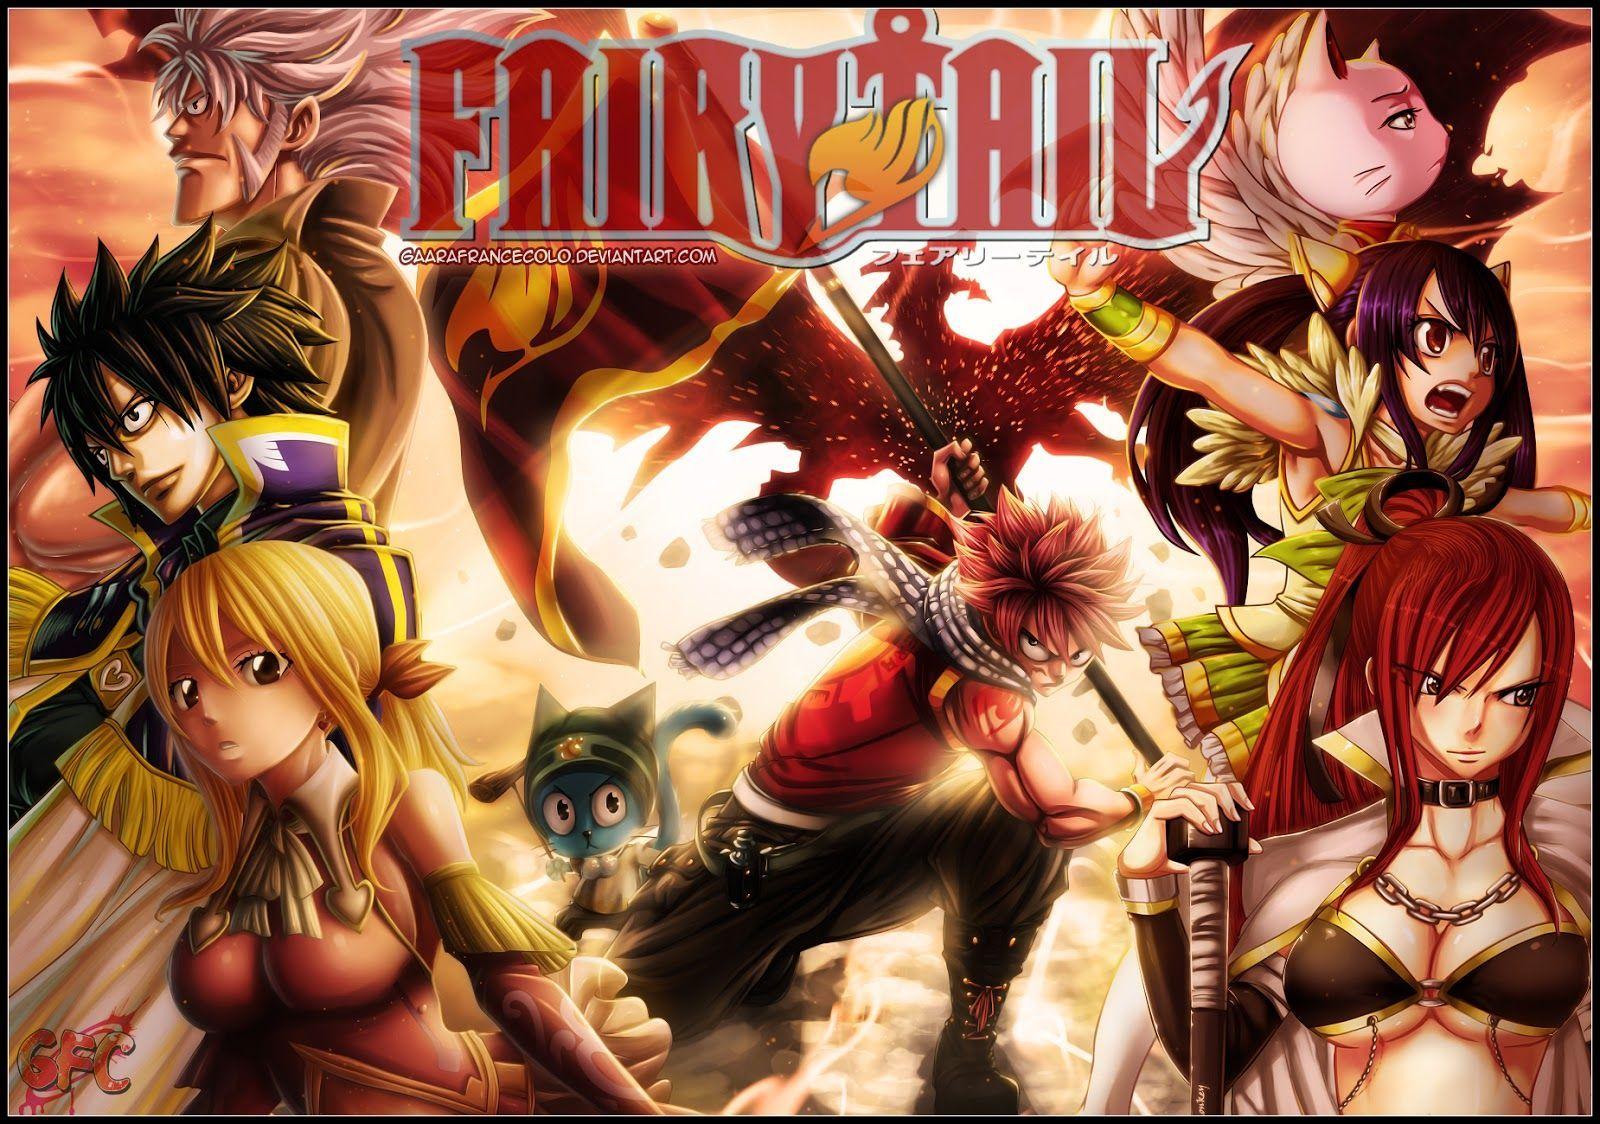 Fairy Tail Pc Wallpapers Top Free Fairy Tail Pc Backgrounds Wallpaperaccess